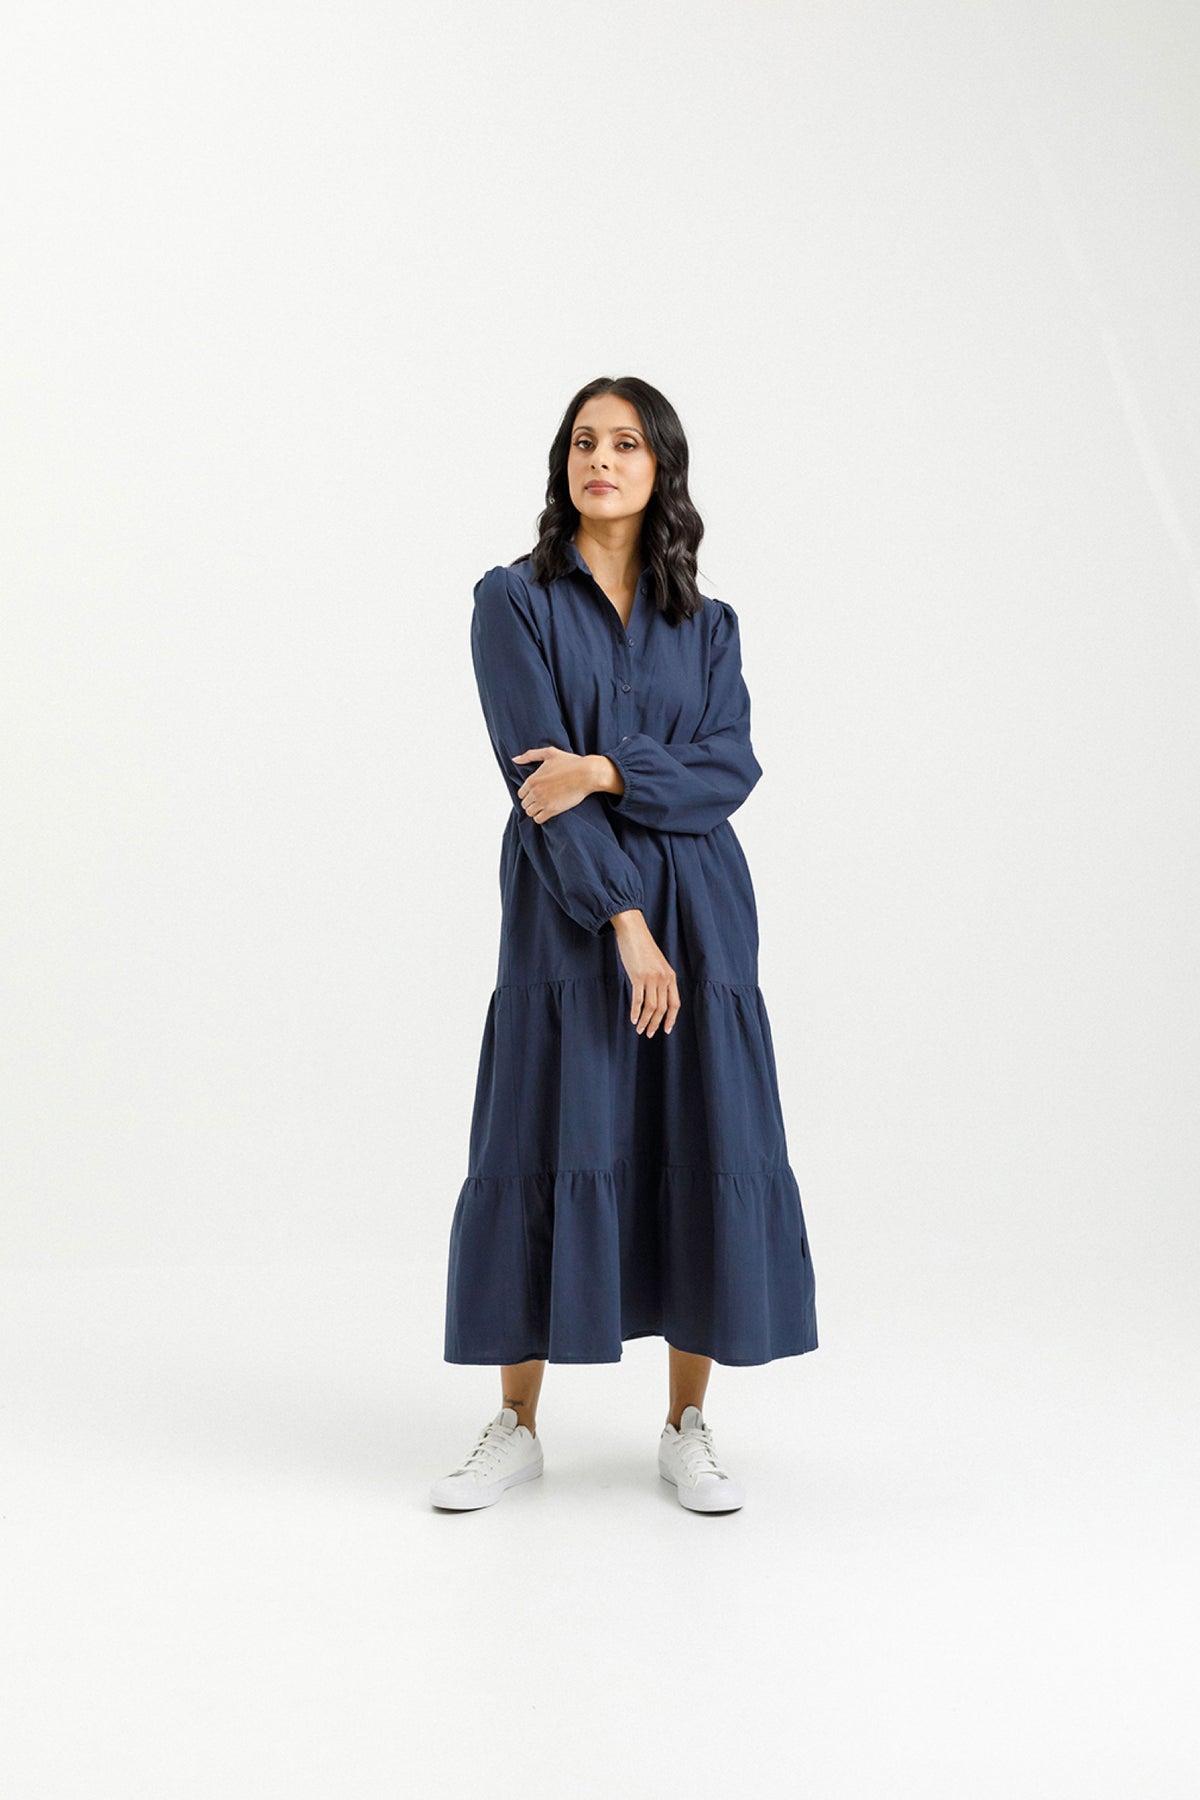 Long Sleeve Khloe Dress Indigo Blue - PREORDER DELIVERY EARLY JUNE